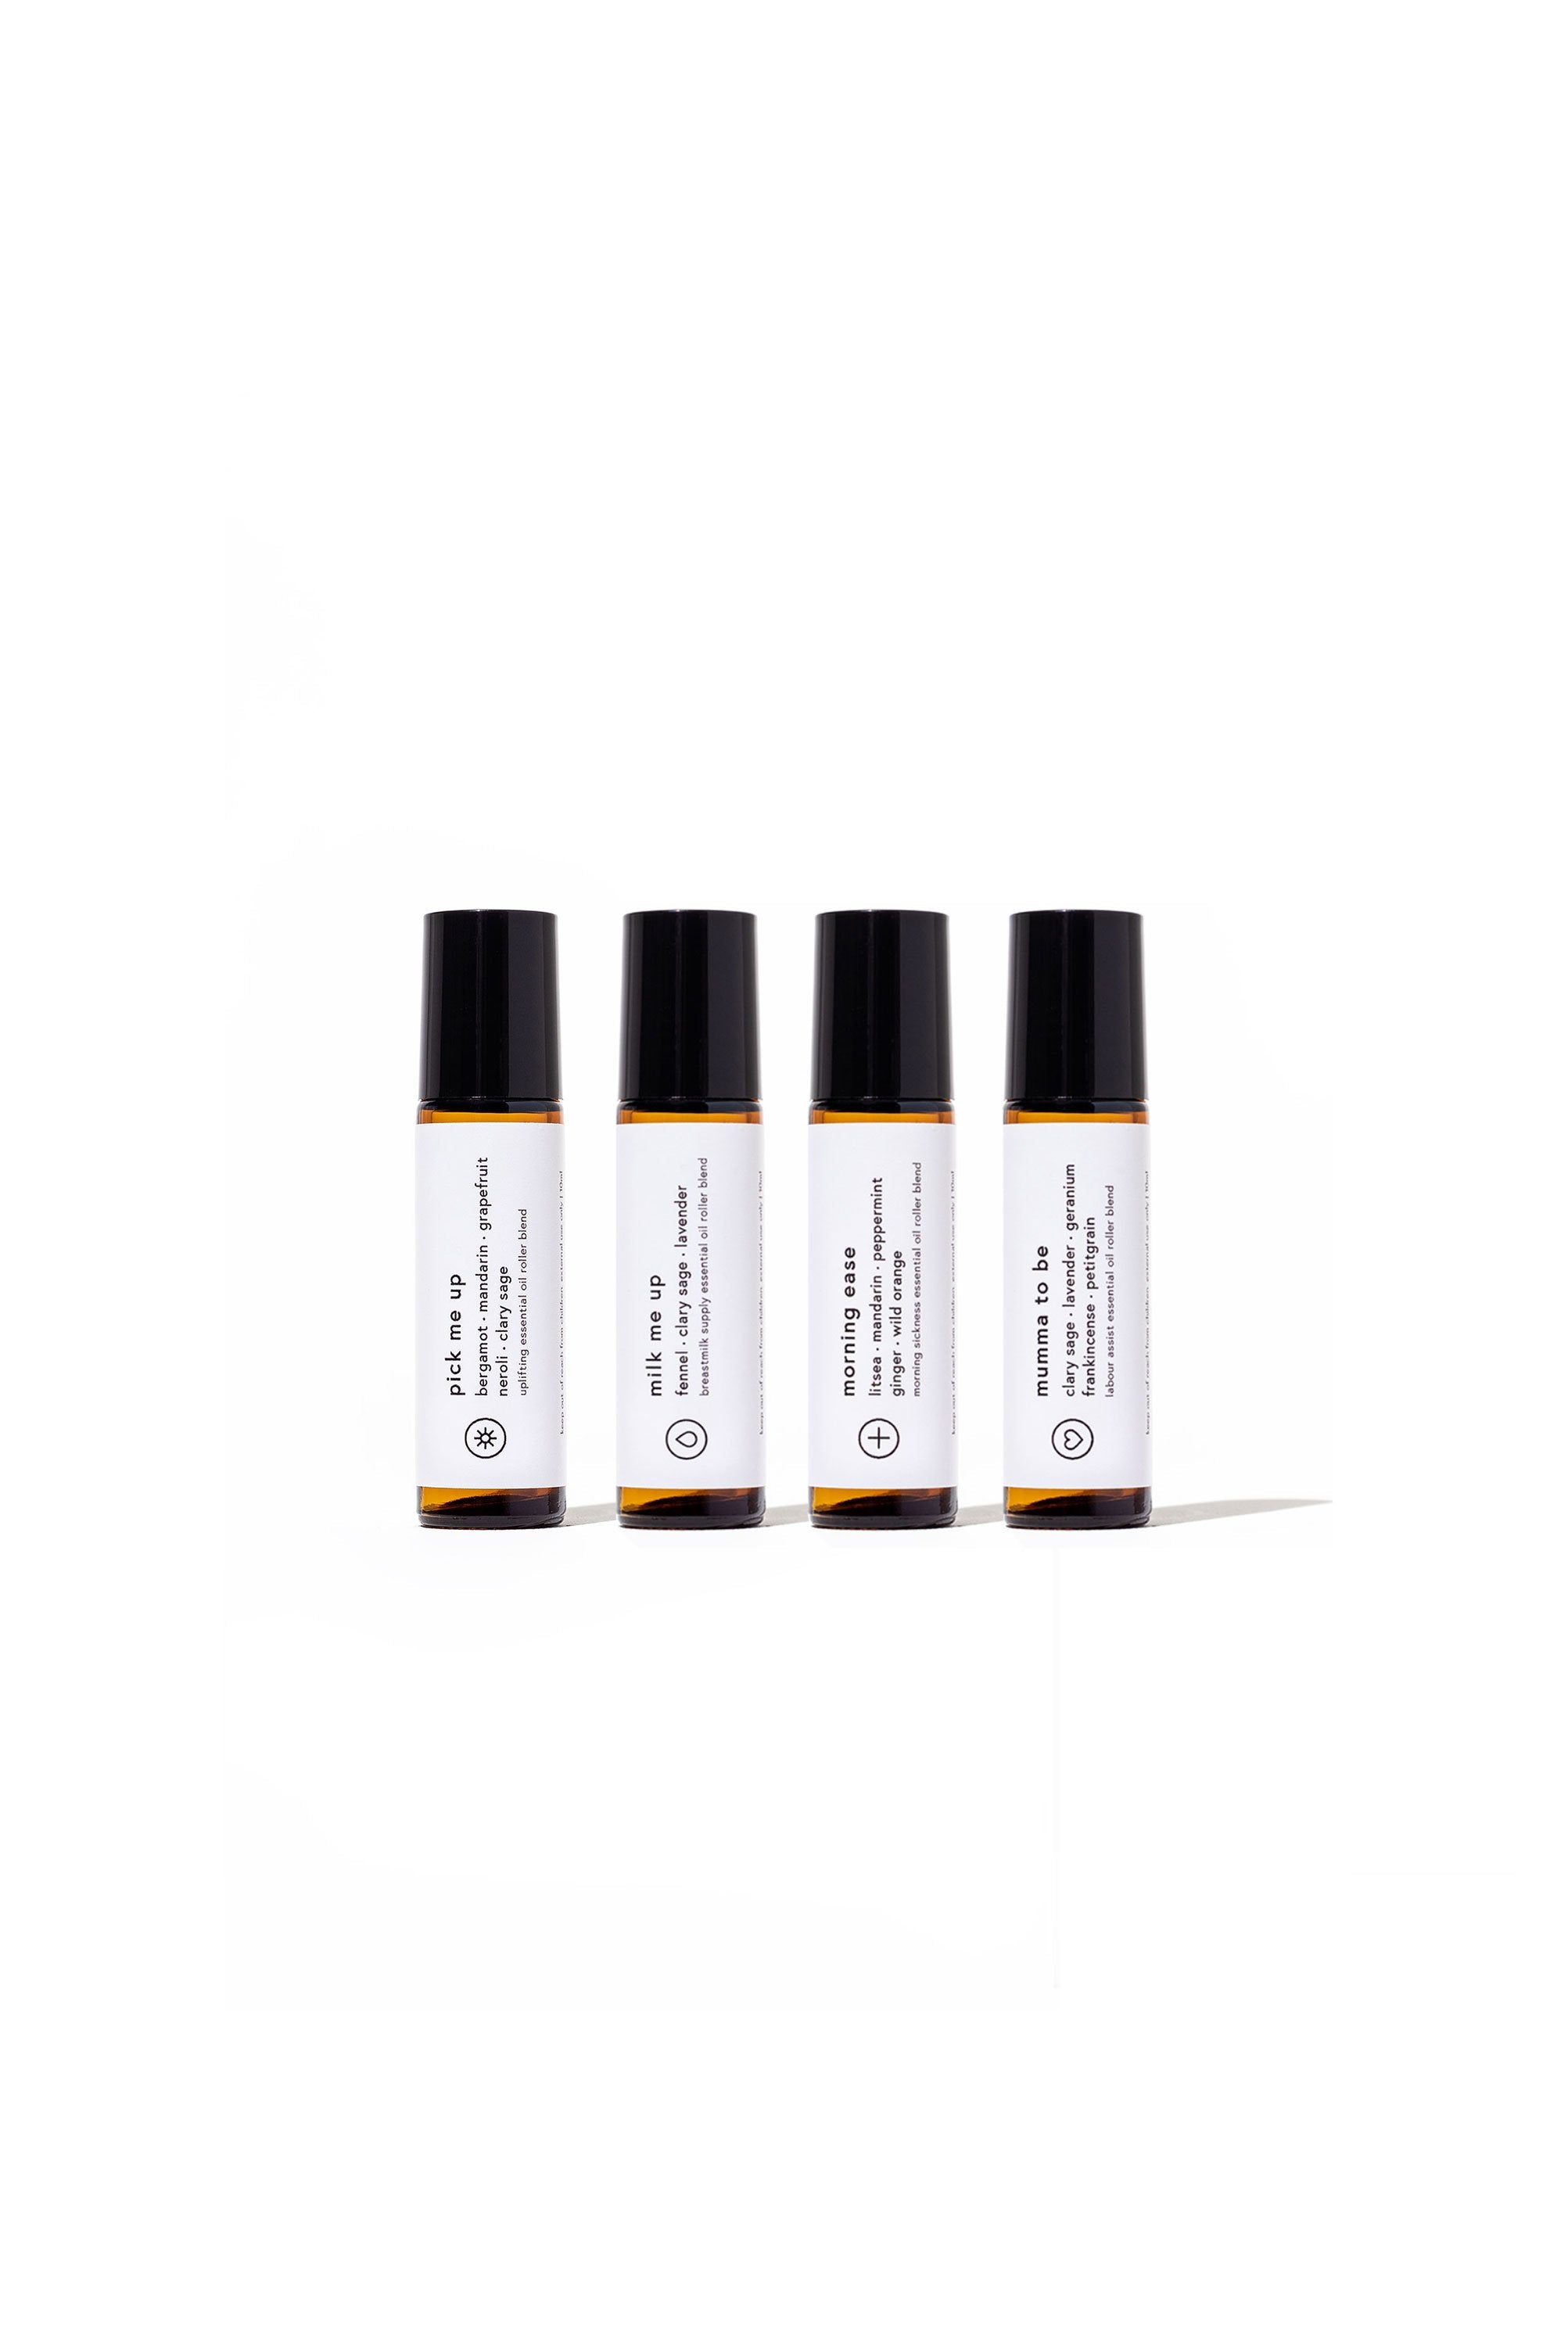 Cleanse & Co. Mumma & Kids Blends. Mum Essential Oil Blend Collection Rollers.